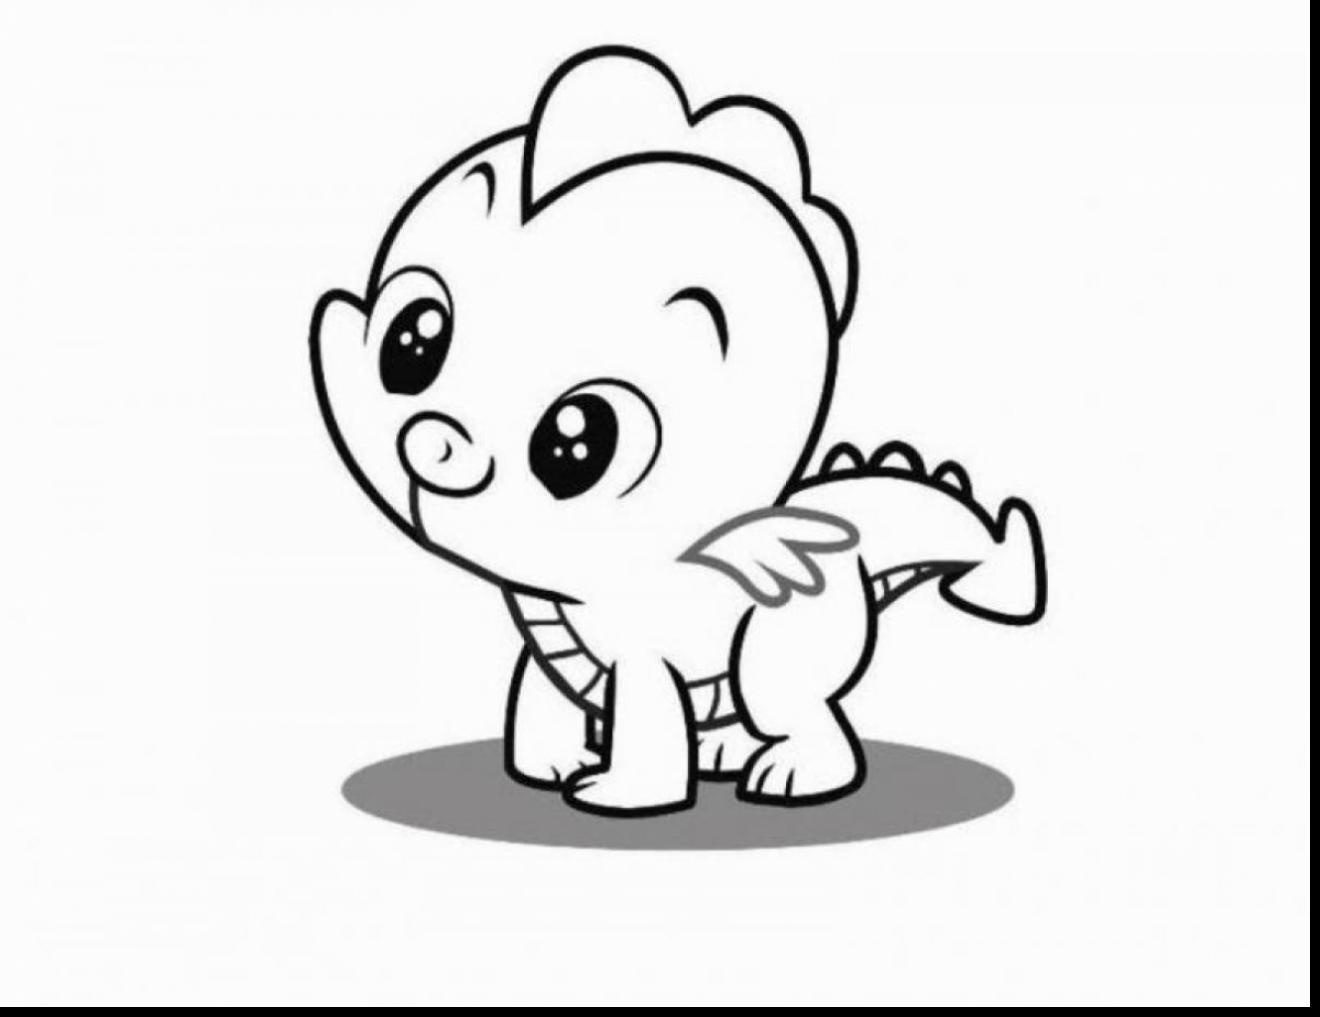 Zoo Animal Coloring Pages | Free Download Best Zoo Animal Coloring - Free Printable Pictures Of Baby Animals